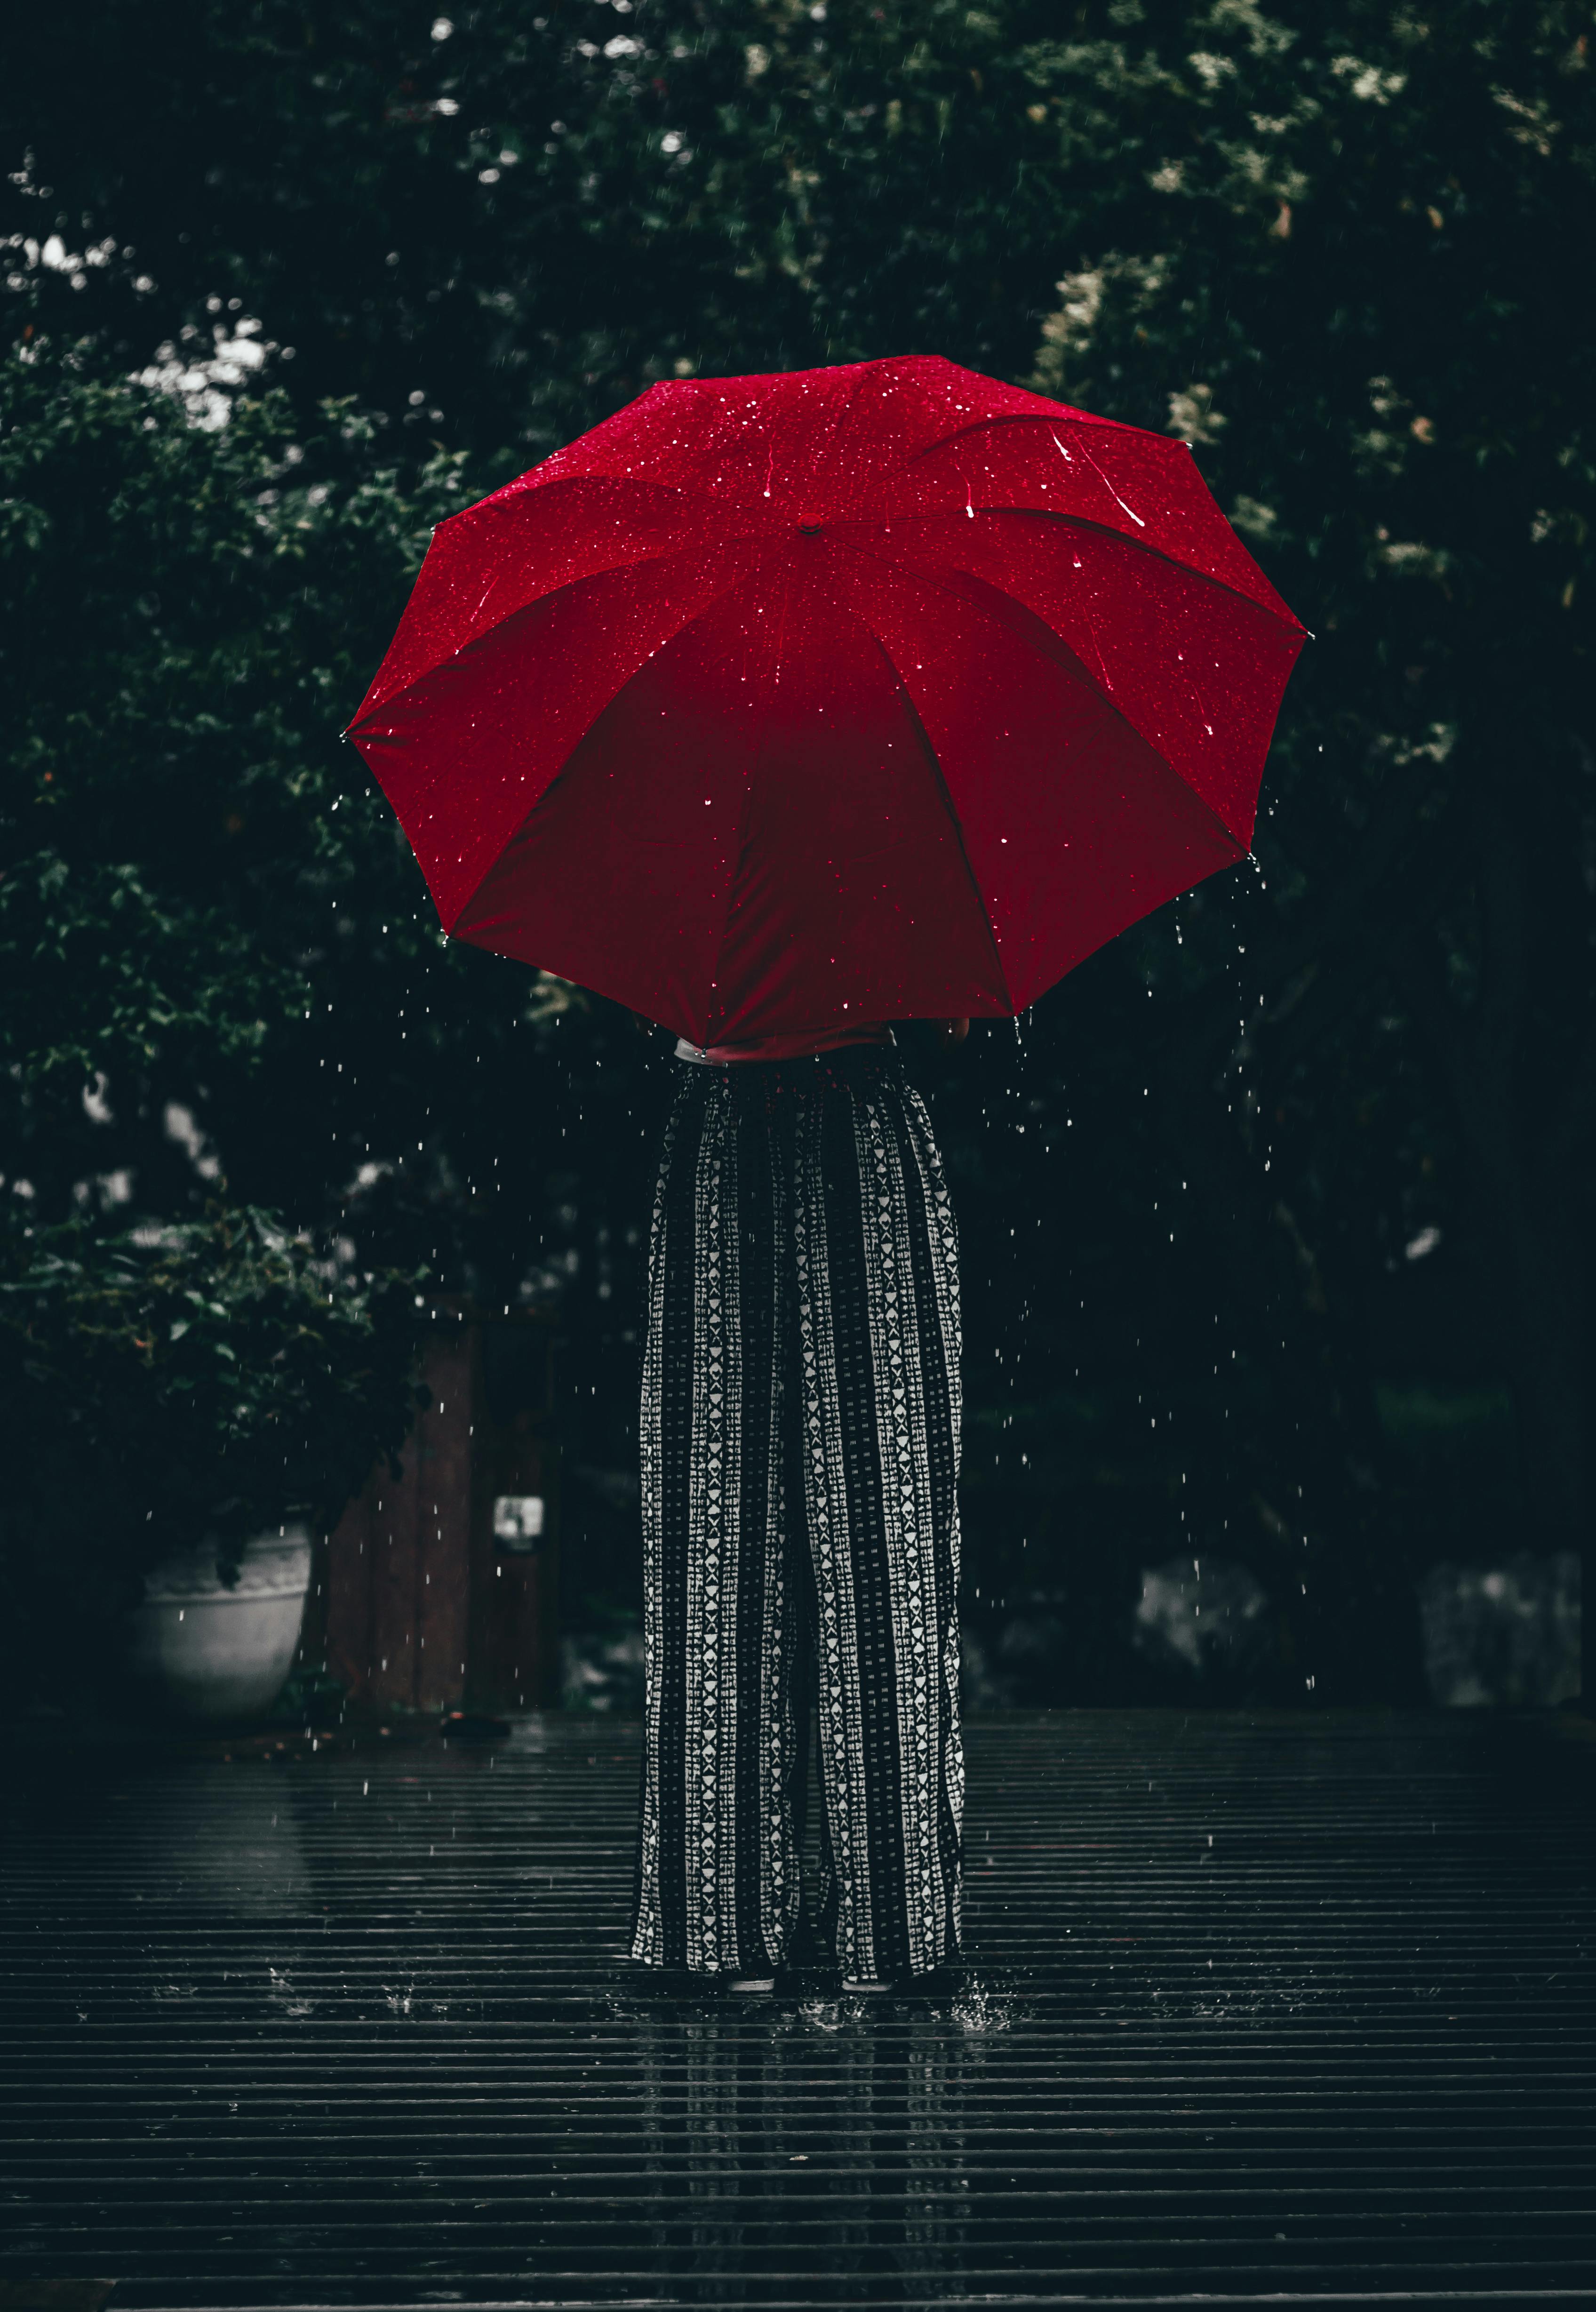 350 Rain Wallpapers HD  Download Free Images  Stock Photos On Unsplash